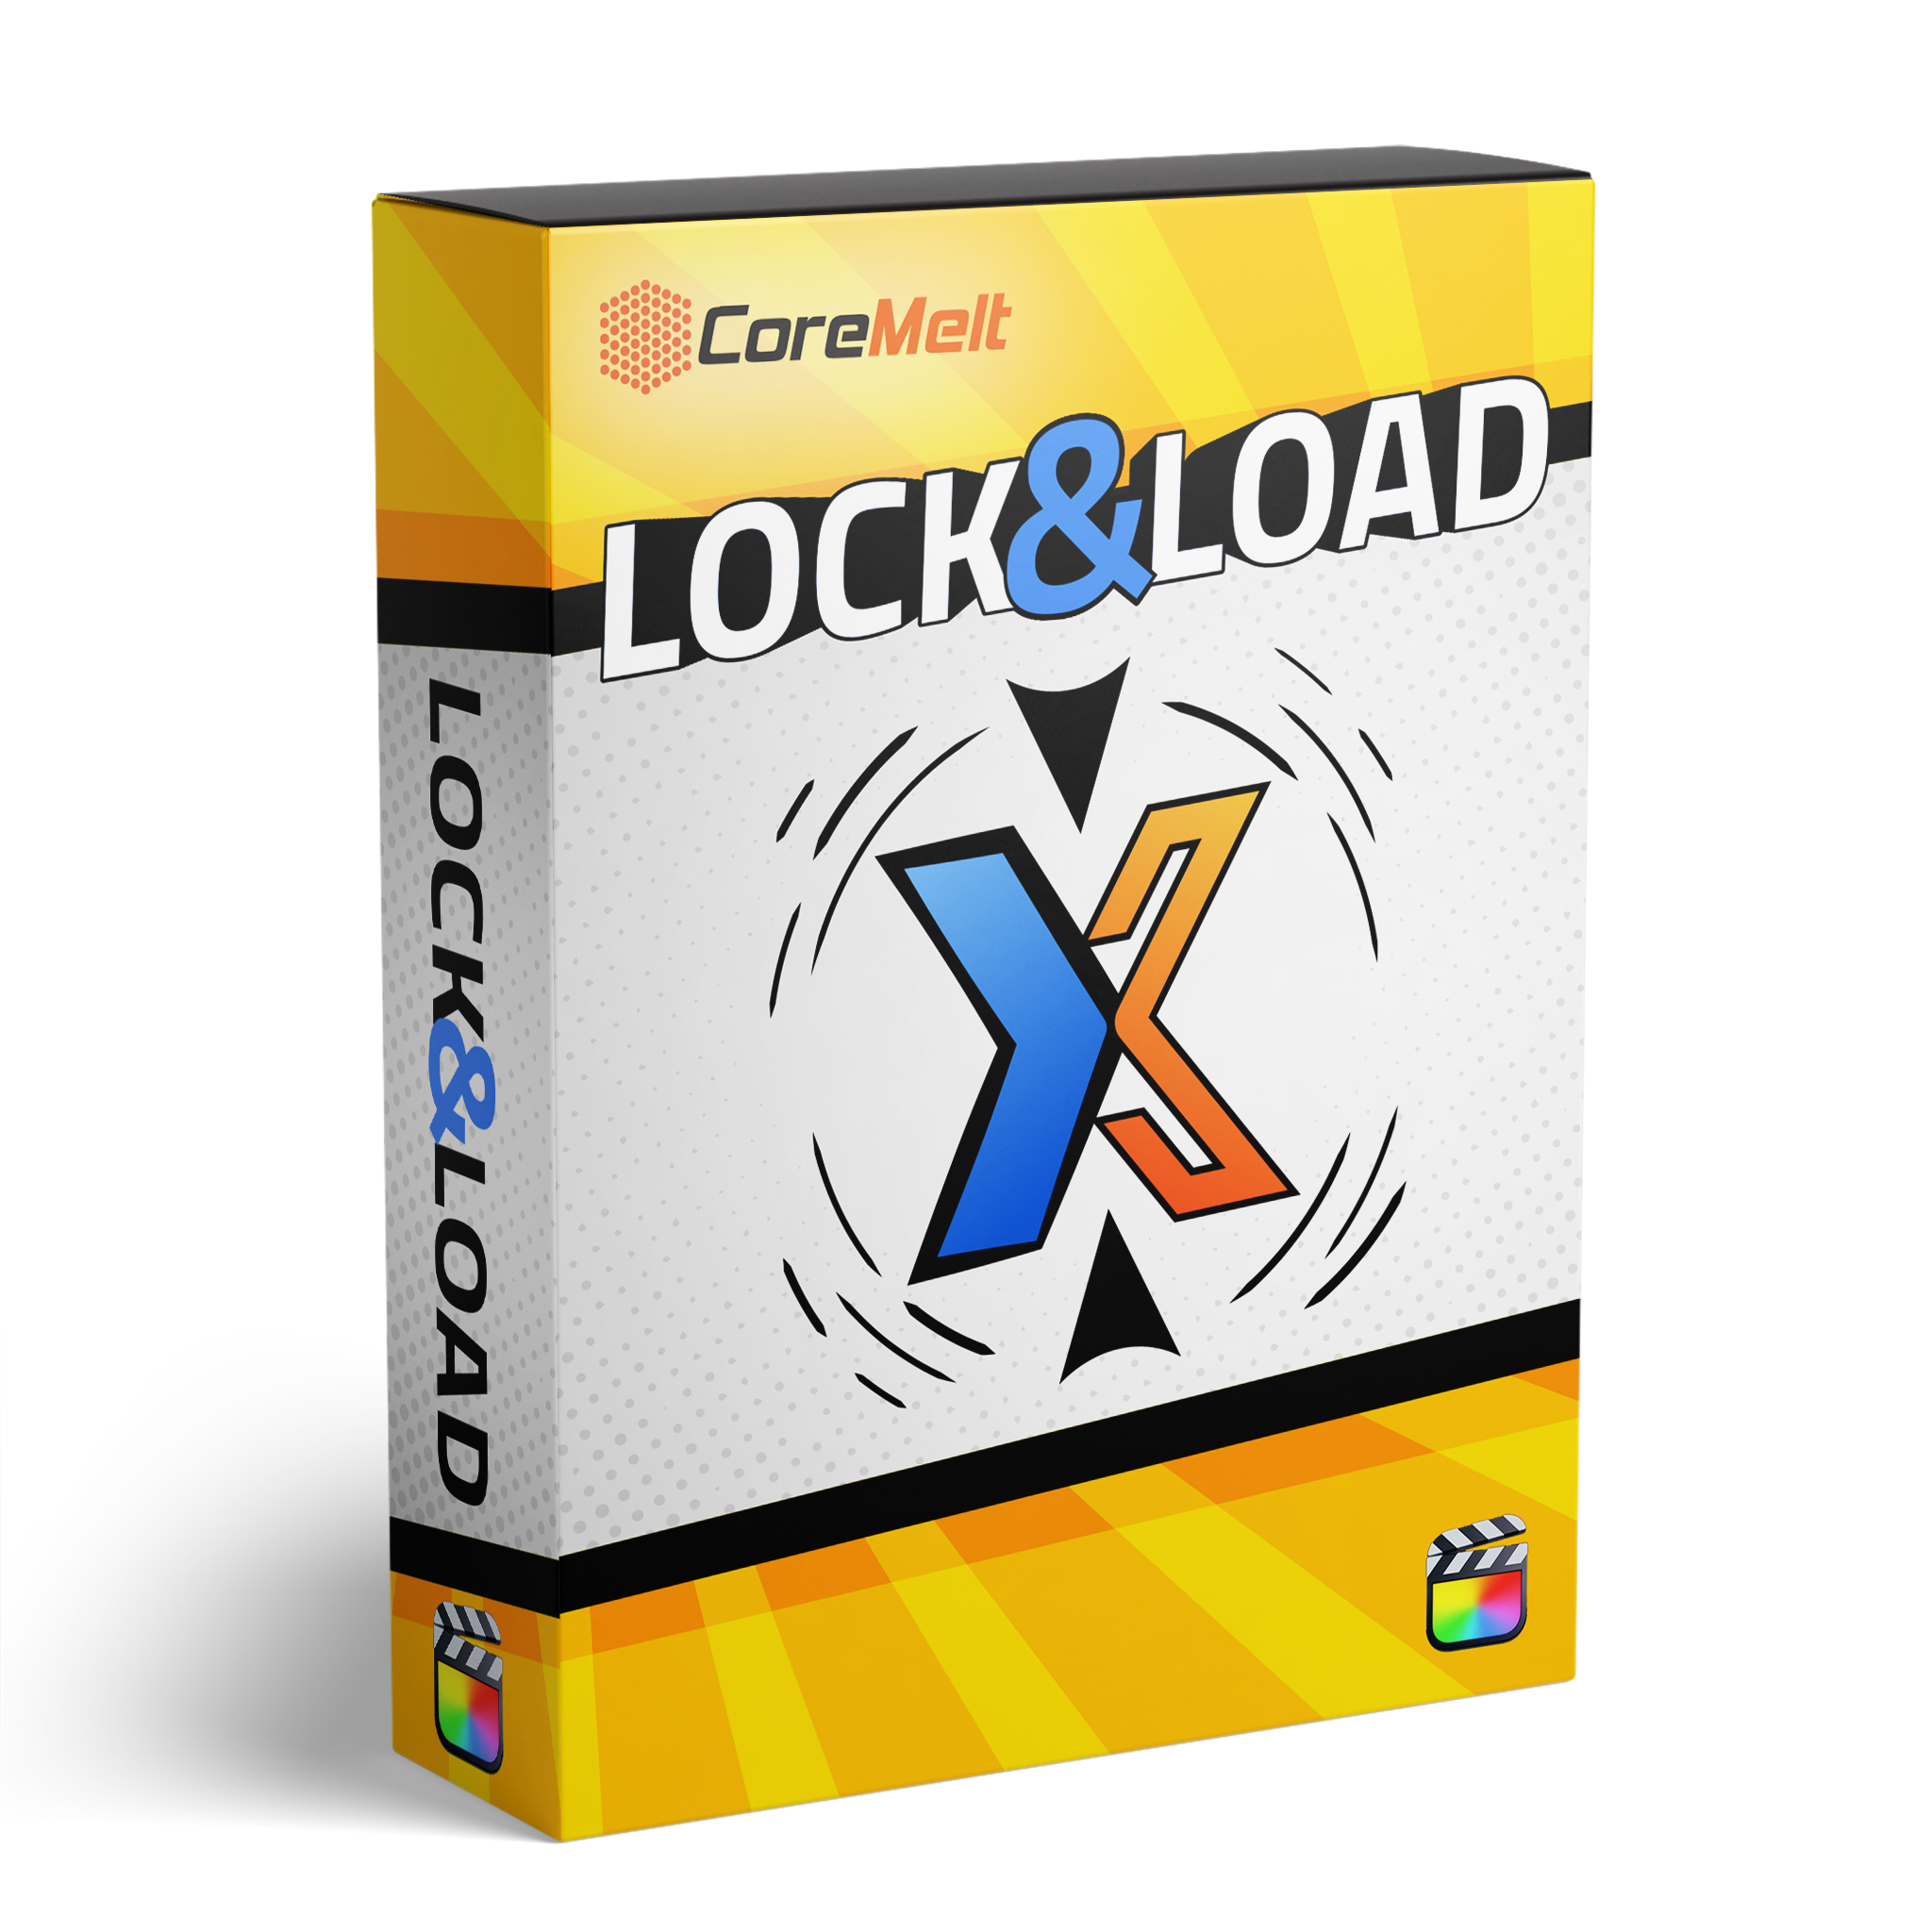 Lock and Load X: The Fastest, Most Powerful Final Cut Pro X Stabilizer